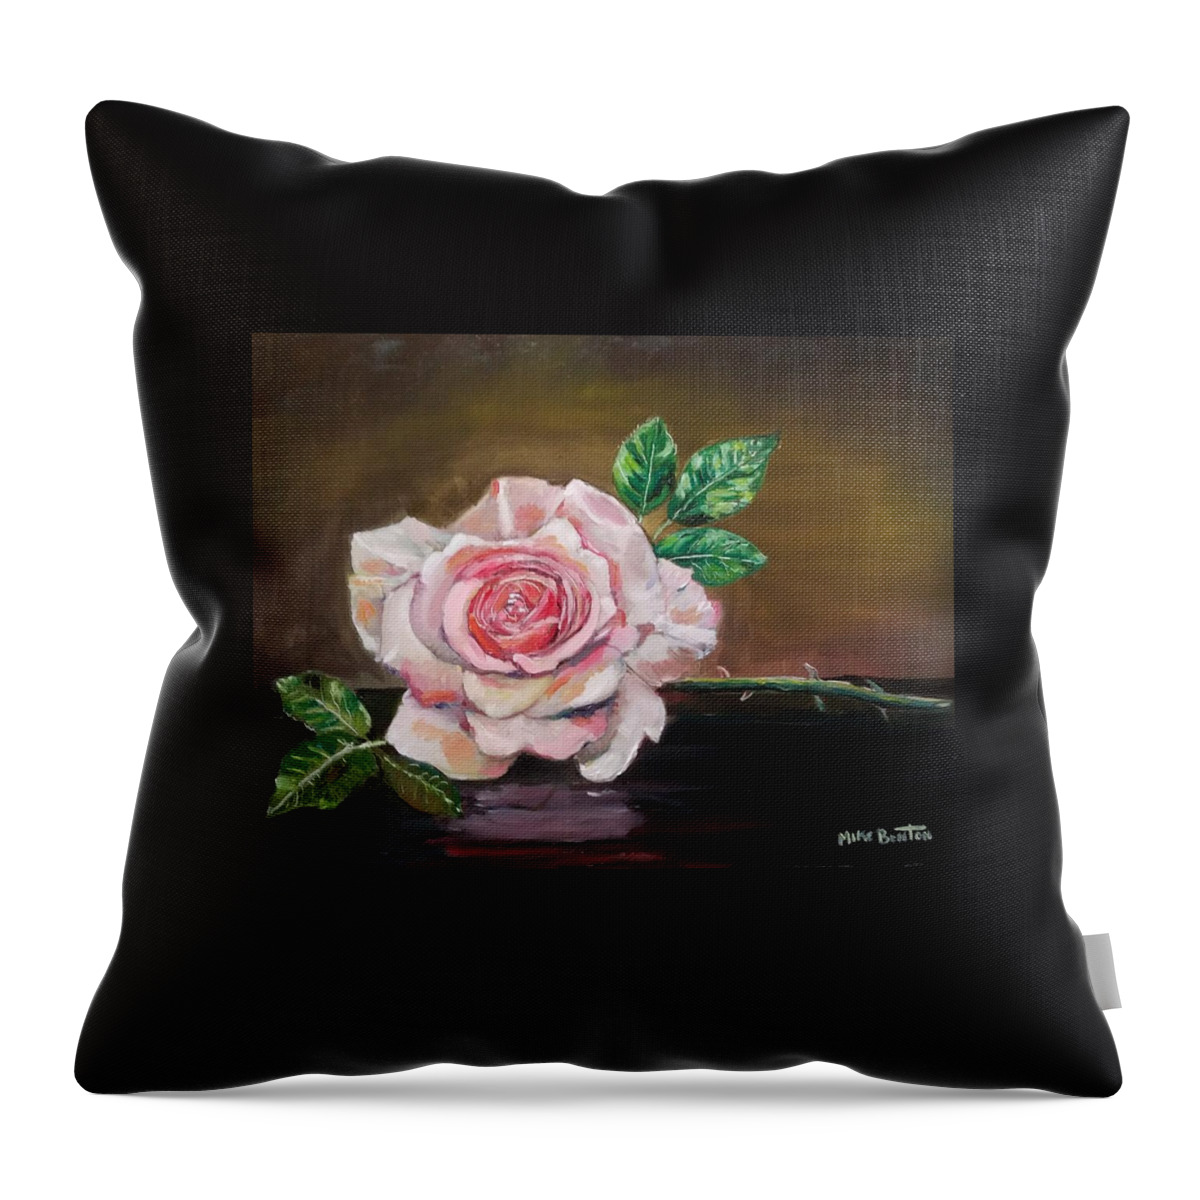 Still Life Throw Pillow featuring the painting Pink Rose by Mike Benton